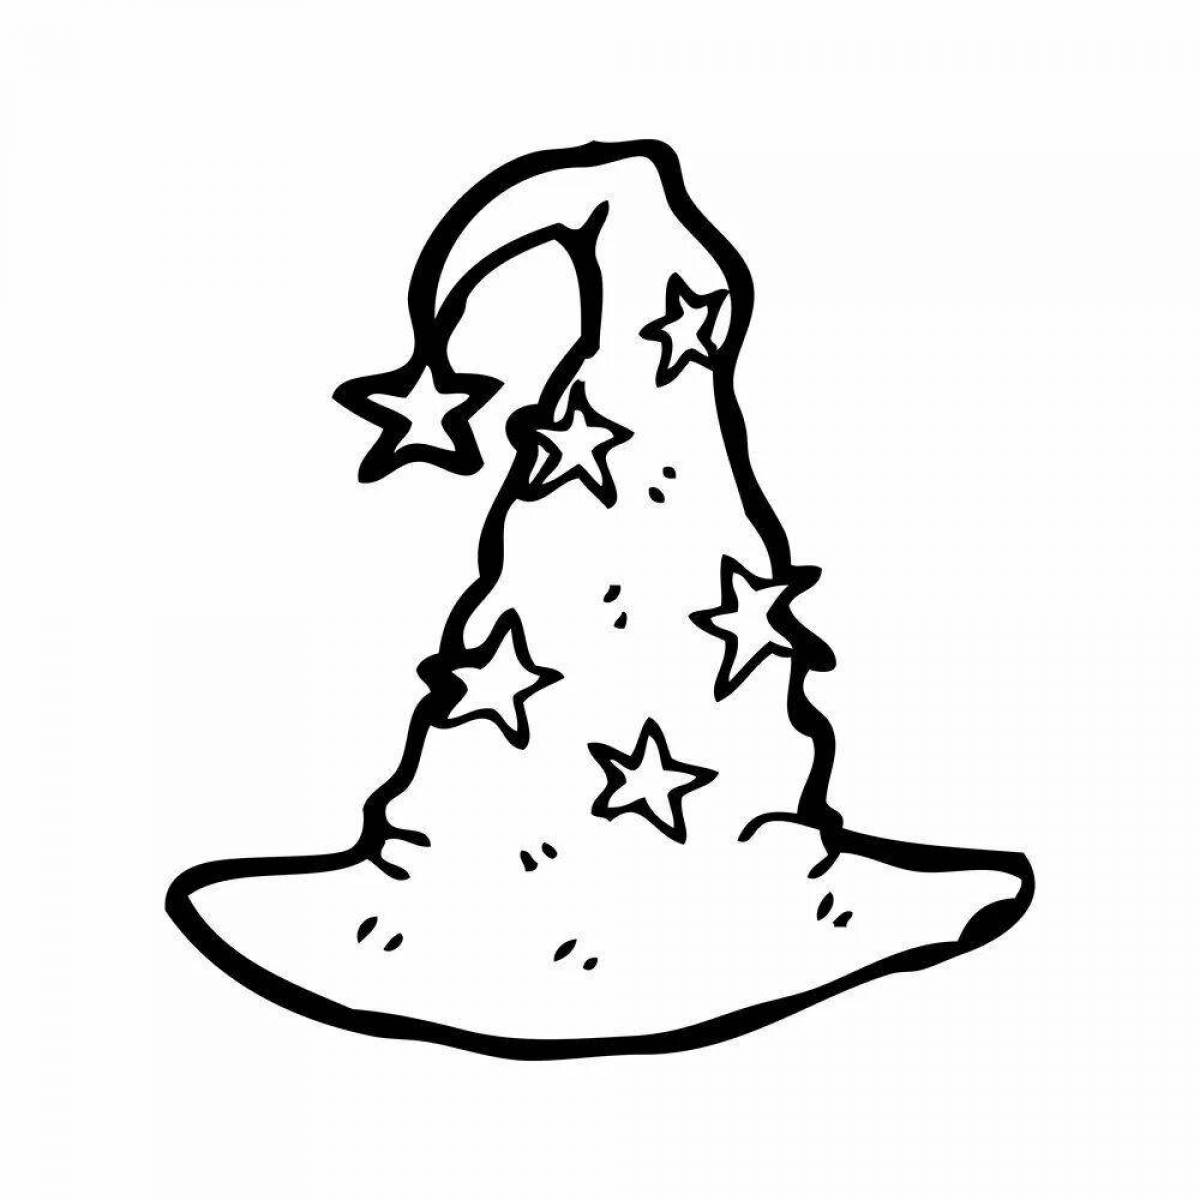 Rich wizard hat coloring page